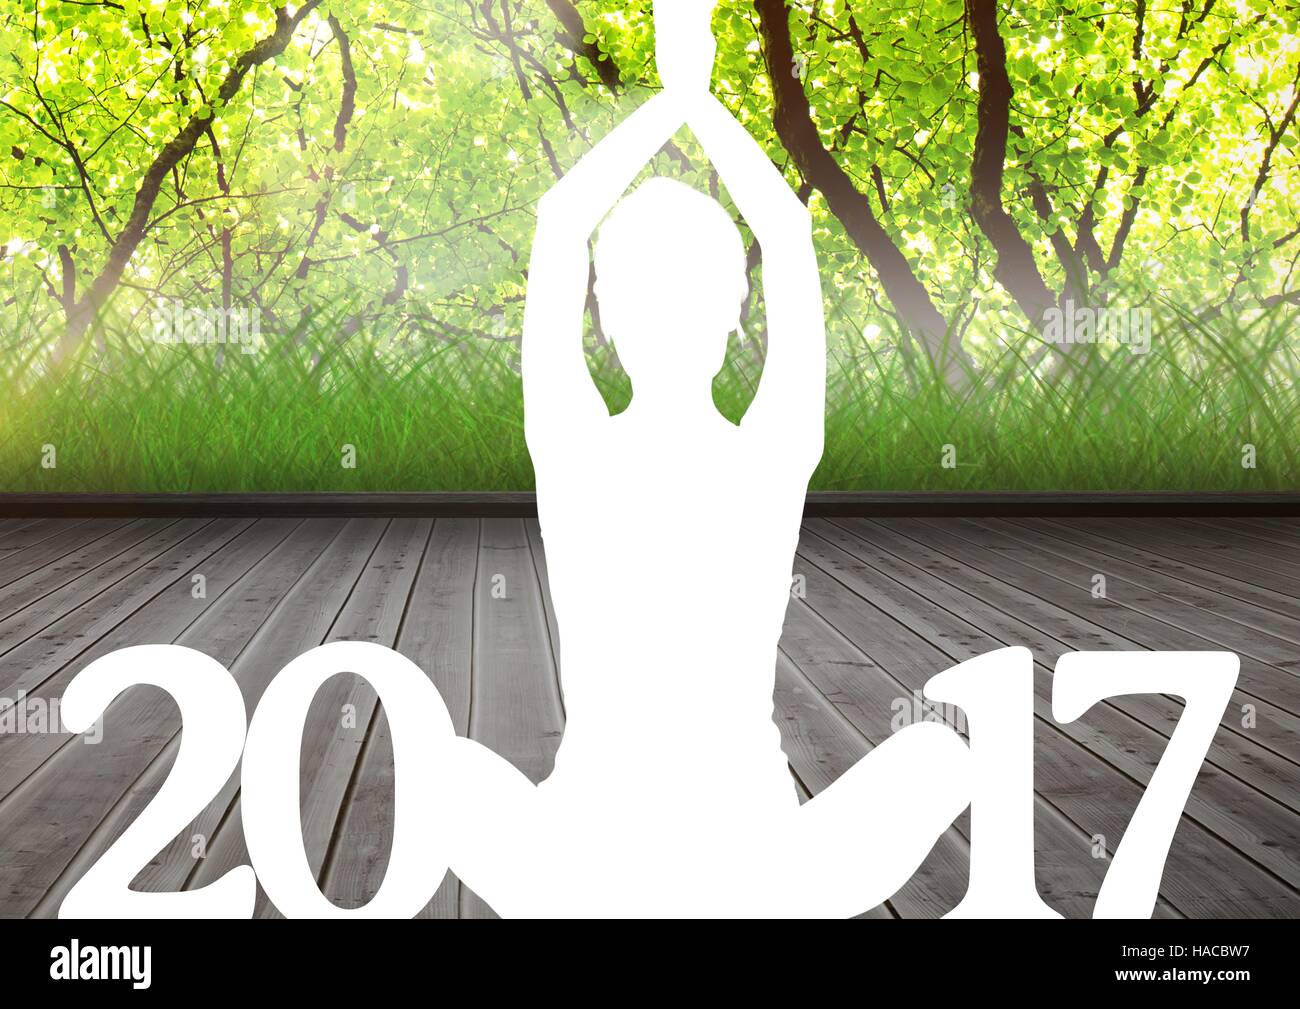 Silhouette of person in yoga pose forming 2017 new year sign 3D Stock Photo